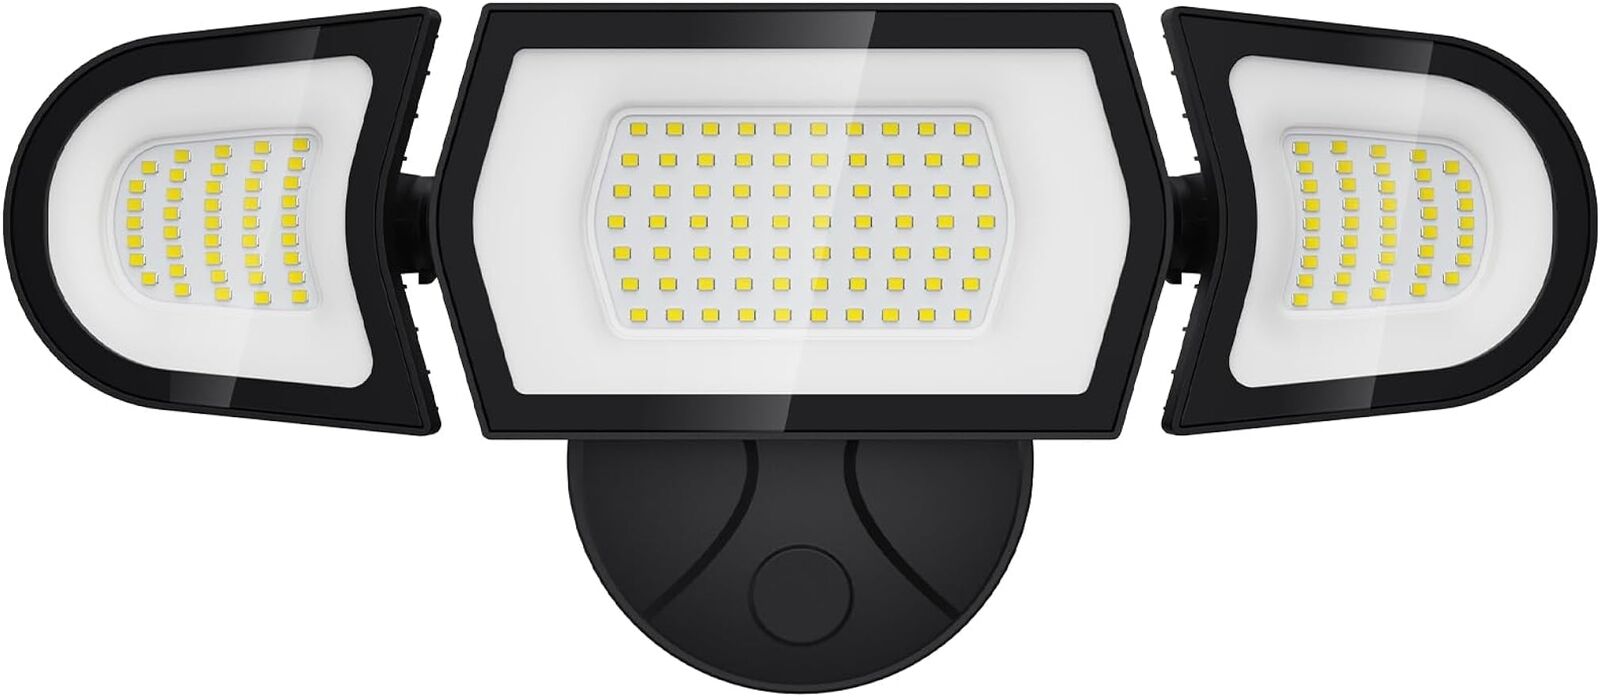  100W Flood Light Outdoor, Switch Controlled 9000LM LED Security Lights